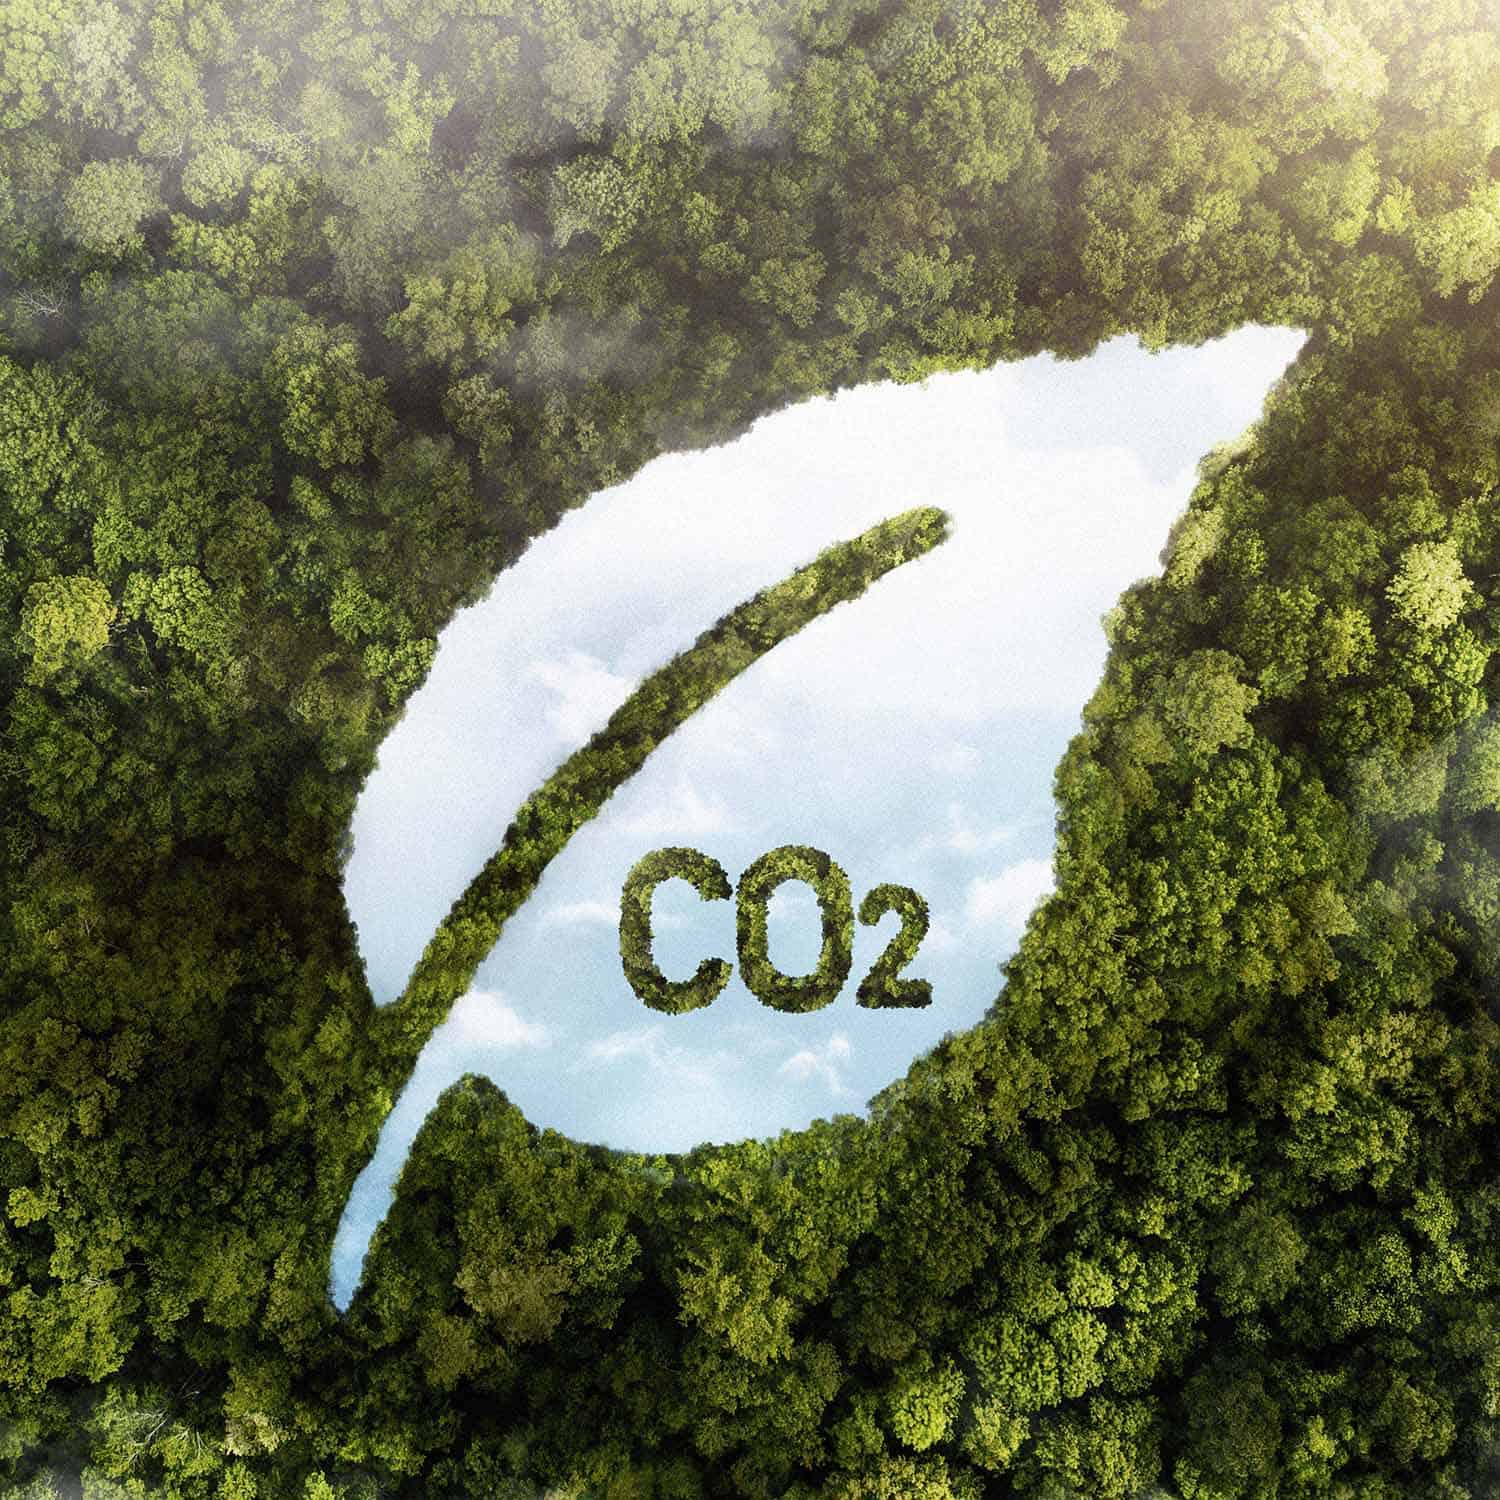 Image by freepik View of green forest trees with co2